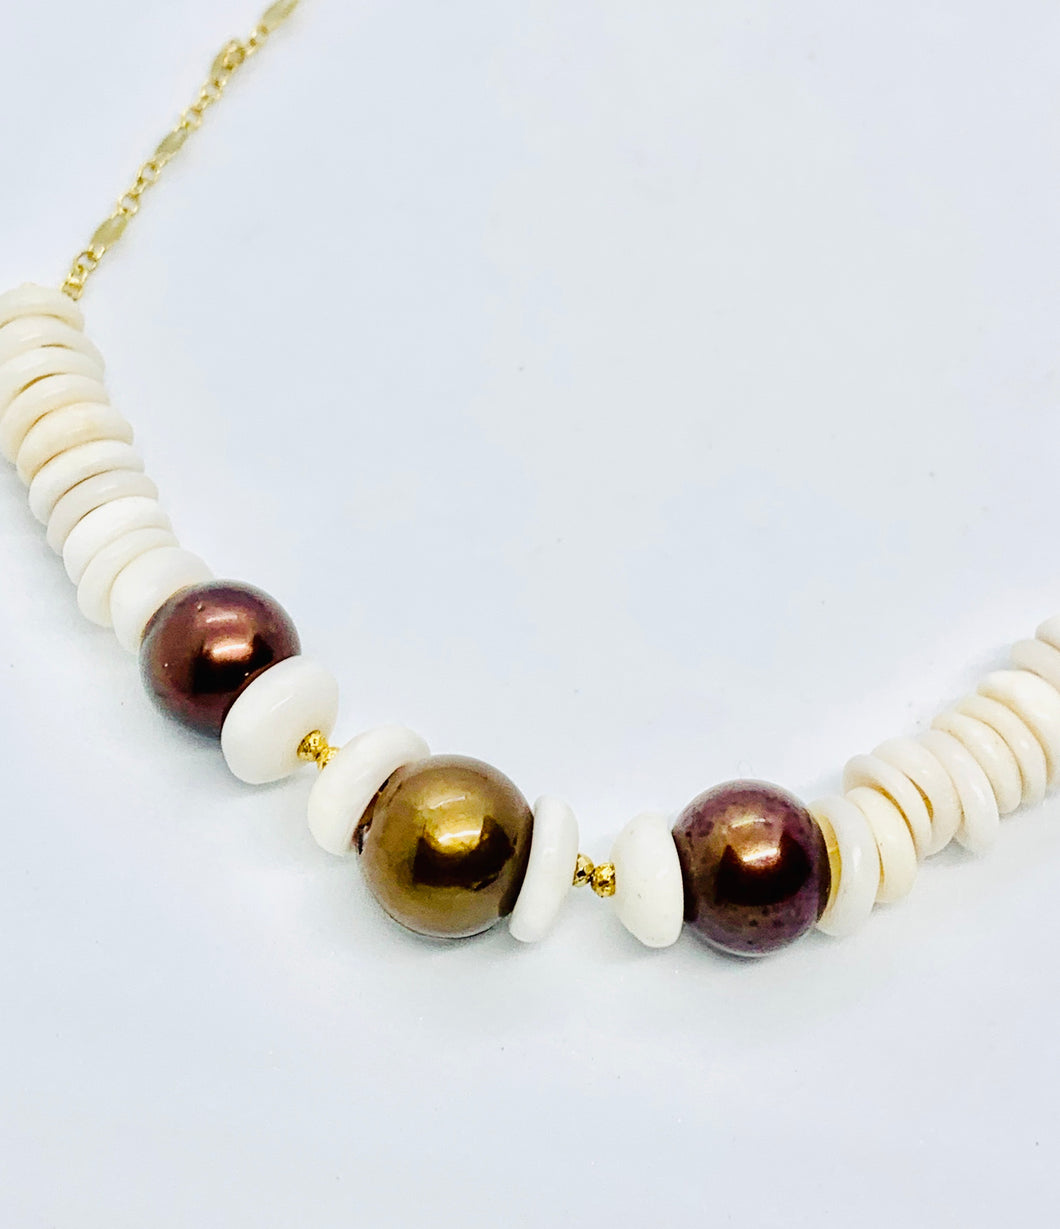 Chocolate Tahitian Pearl and Puka Shell Necklace